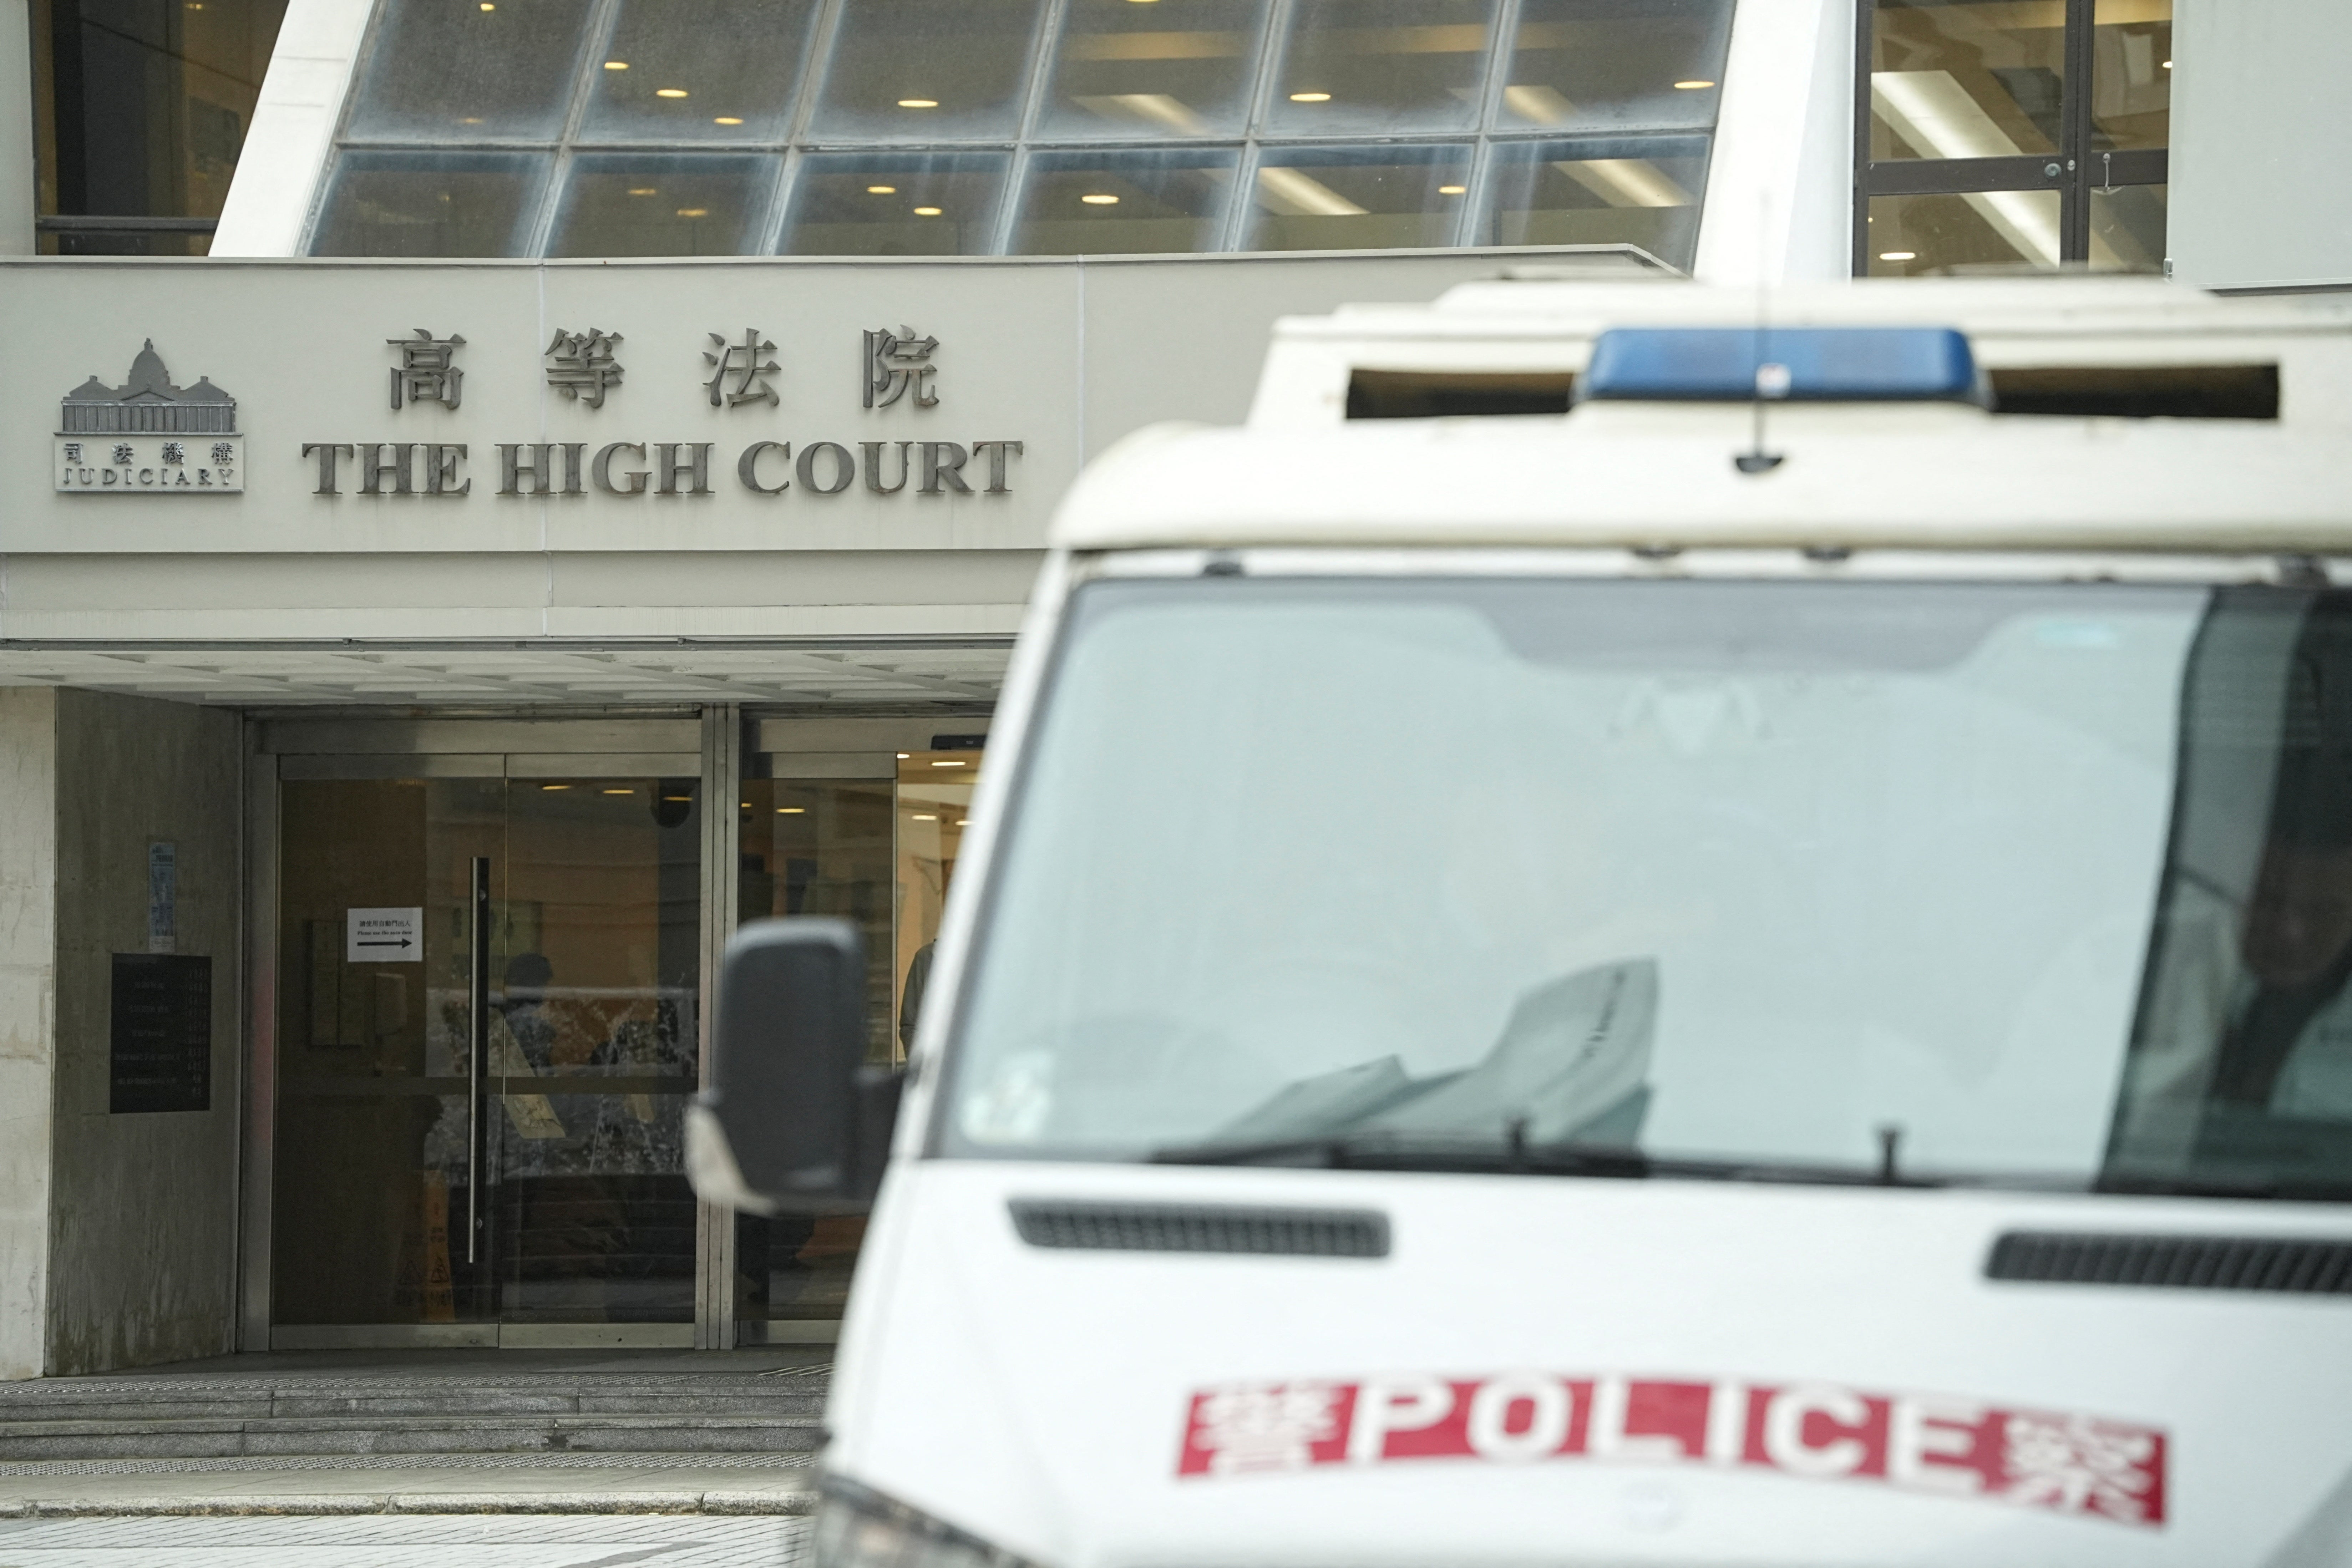 A police vehicle is pictured outside the High Court